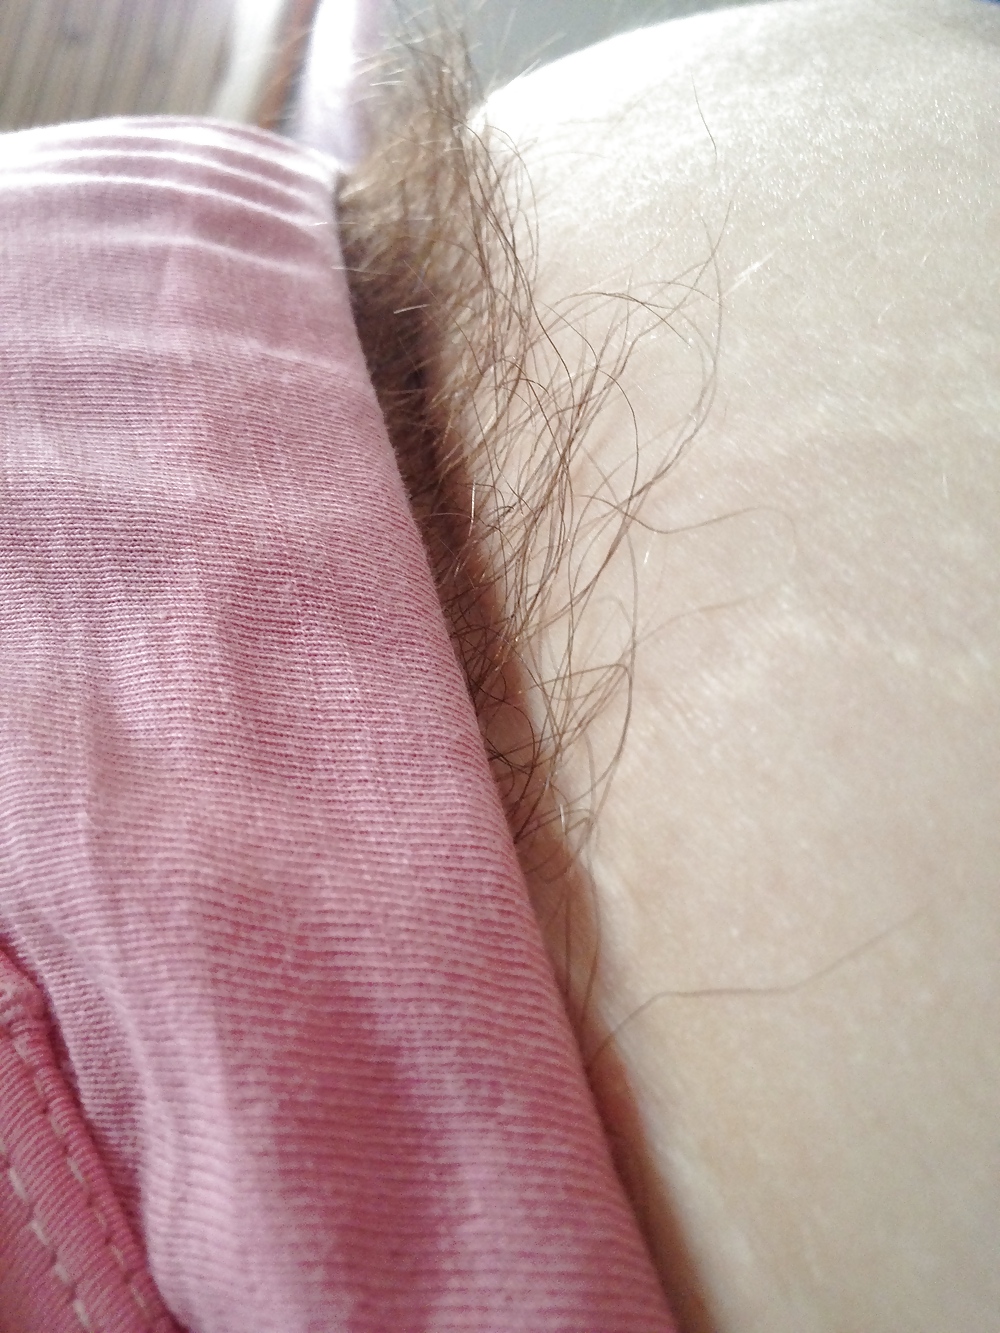 my bbw hairy pussy and titts. porn pictures